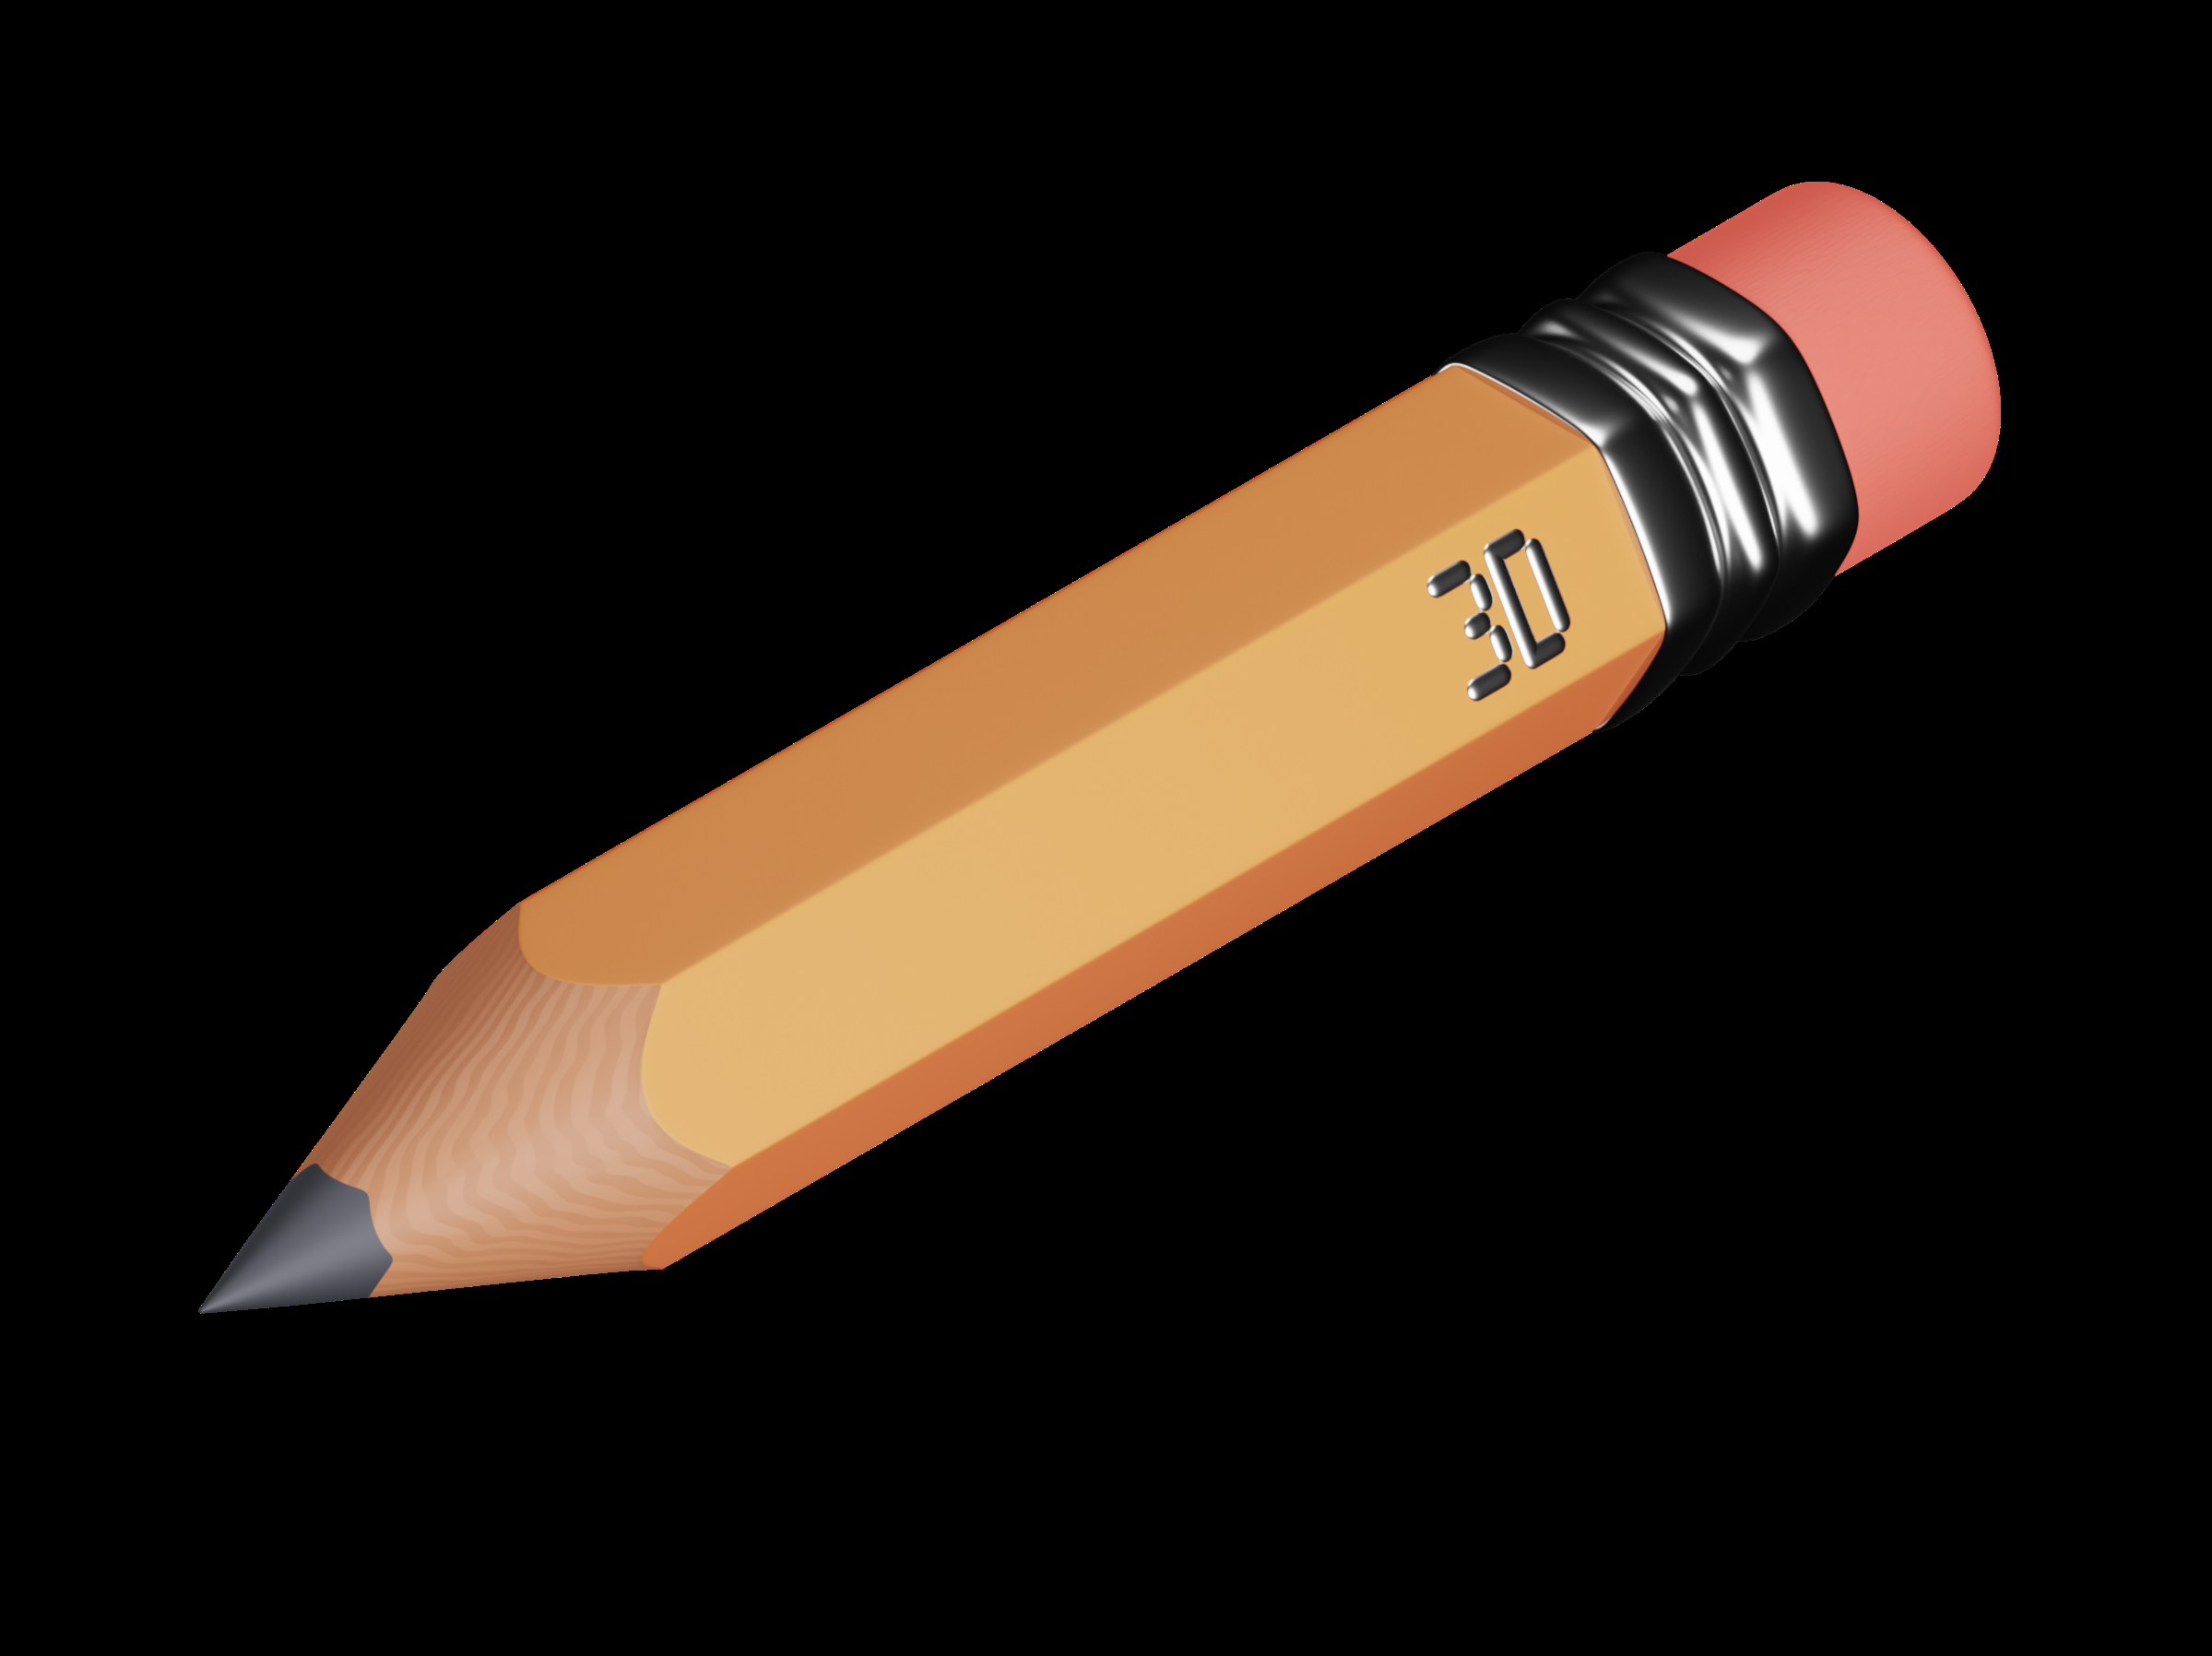 Census Bureau returned to this tool, a simple pencil, after wasting $810 million on computers that never worked.